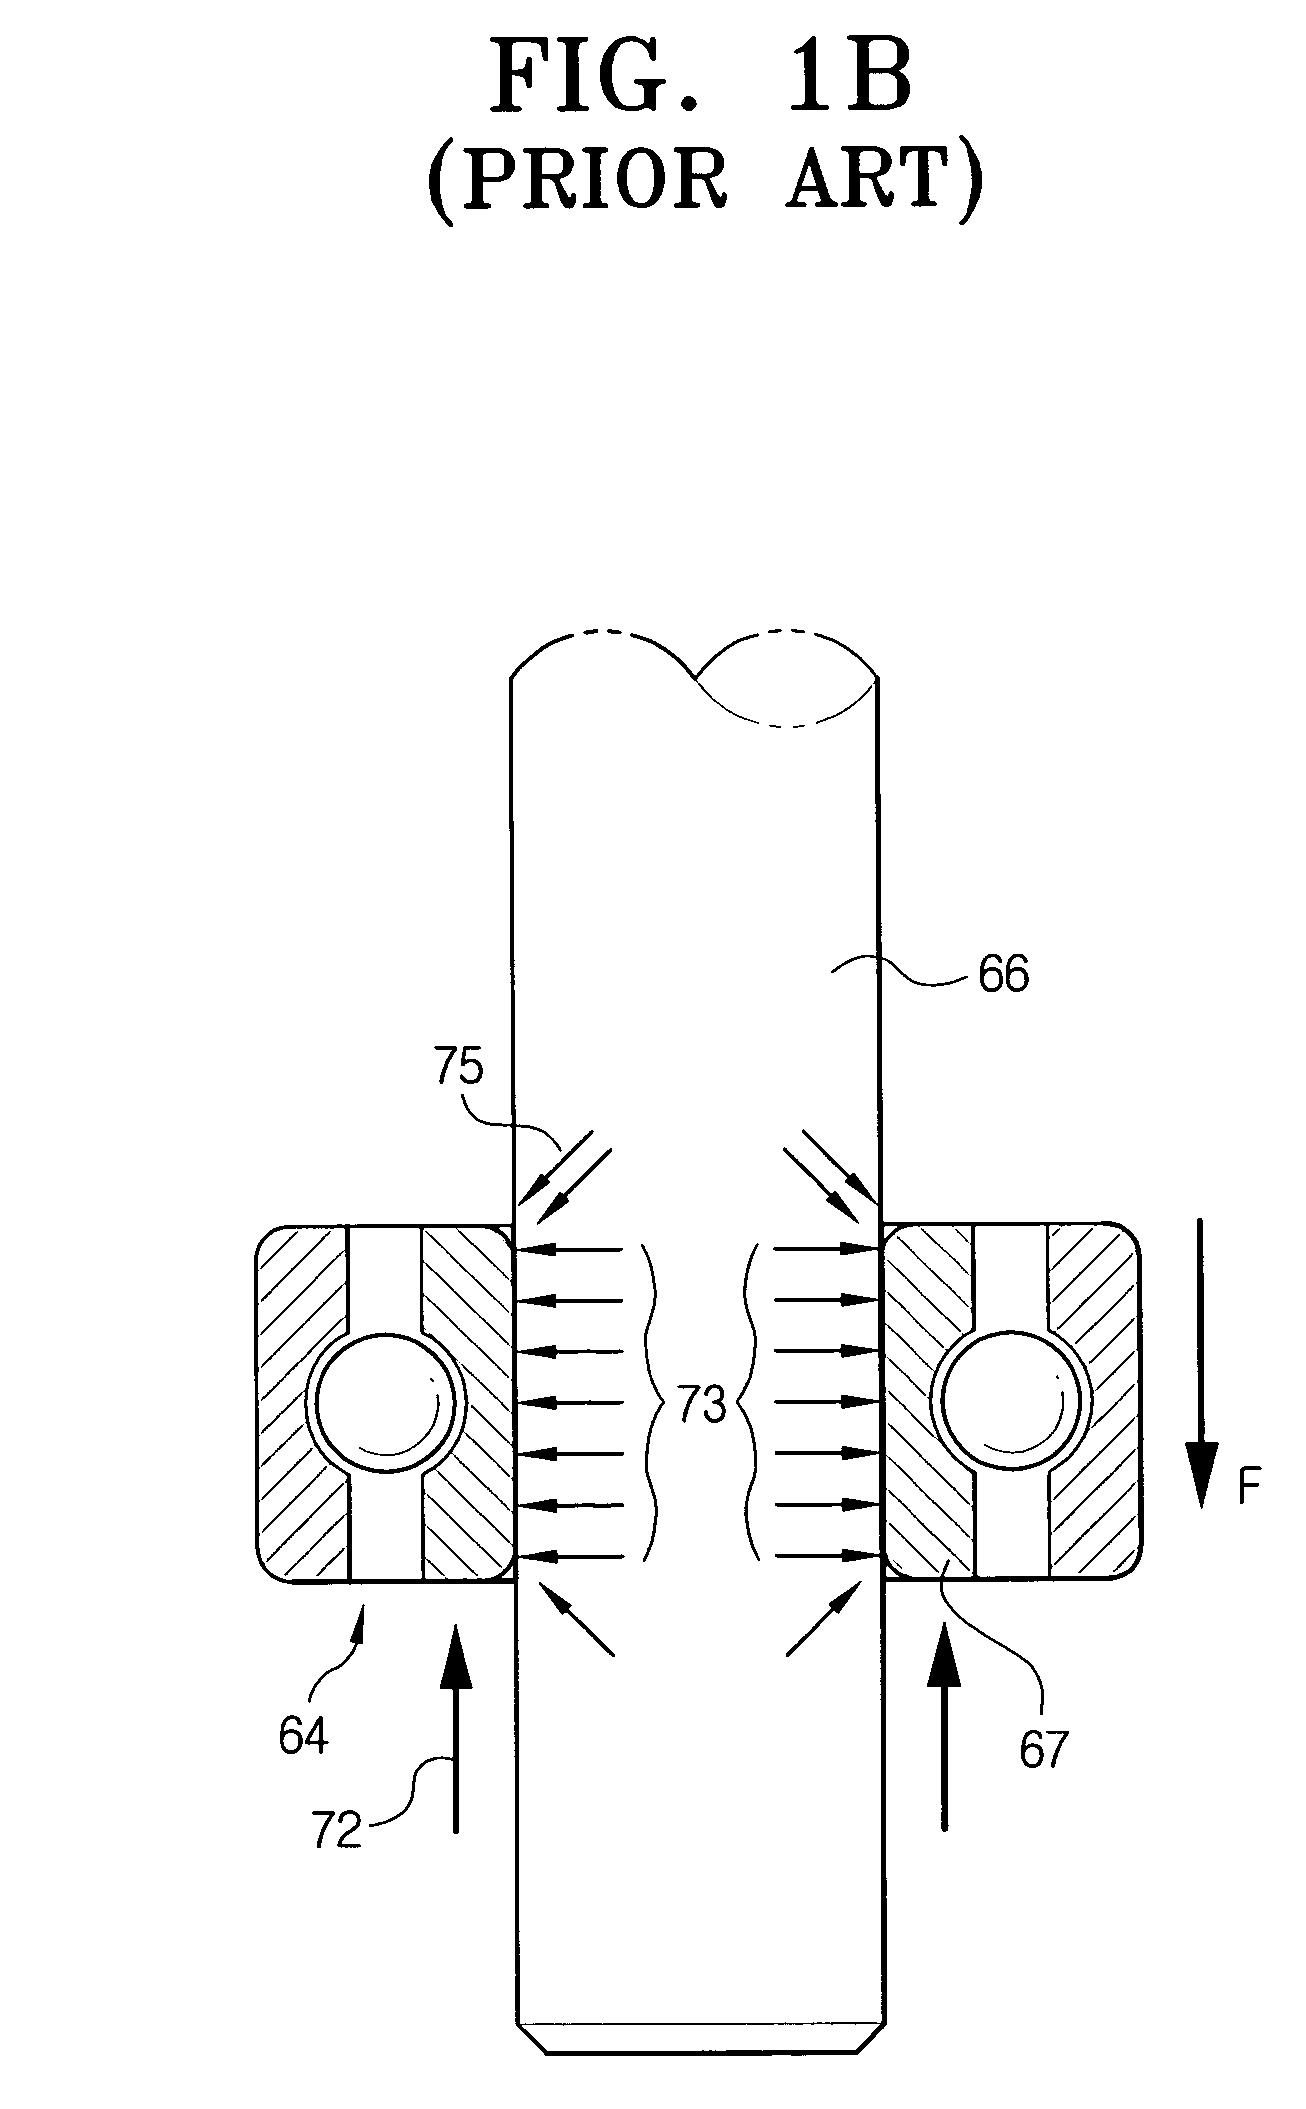 Head drum assembly of a tape recorder having a resilient body to preload bearings thereof